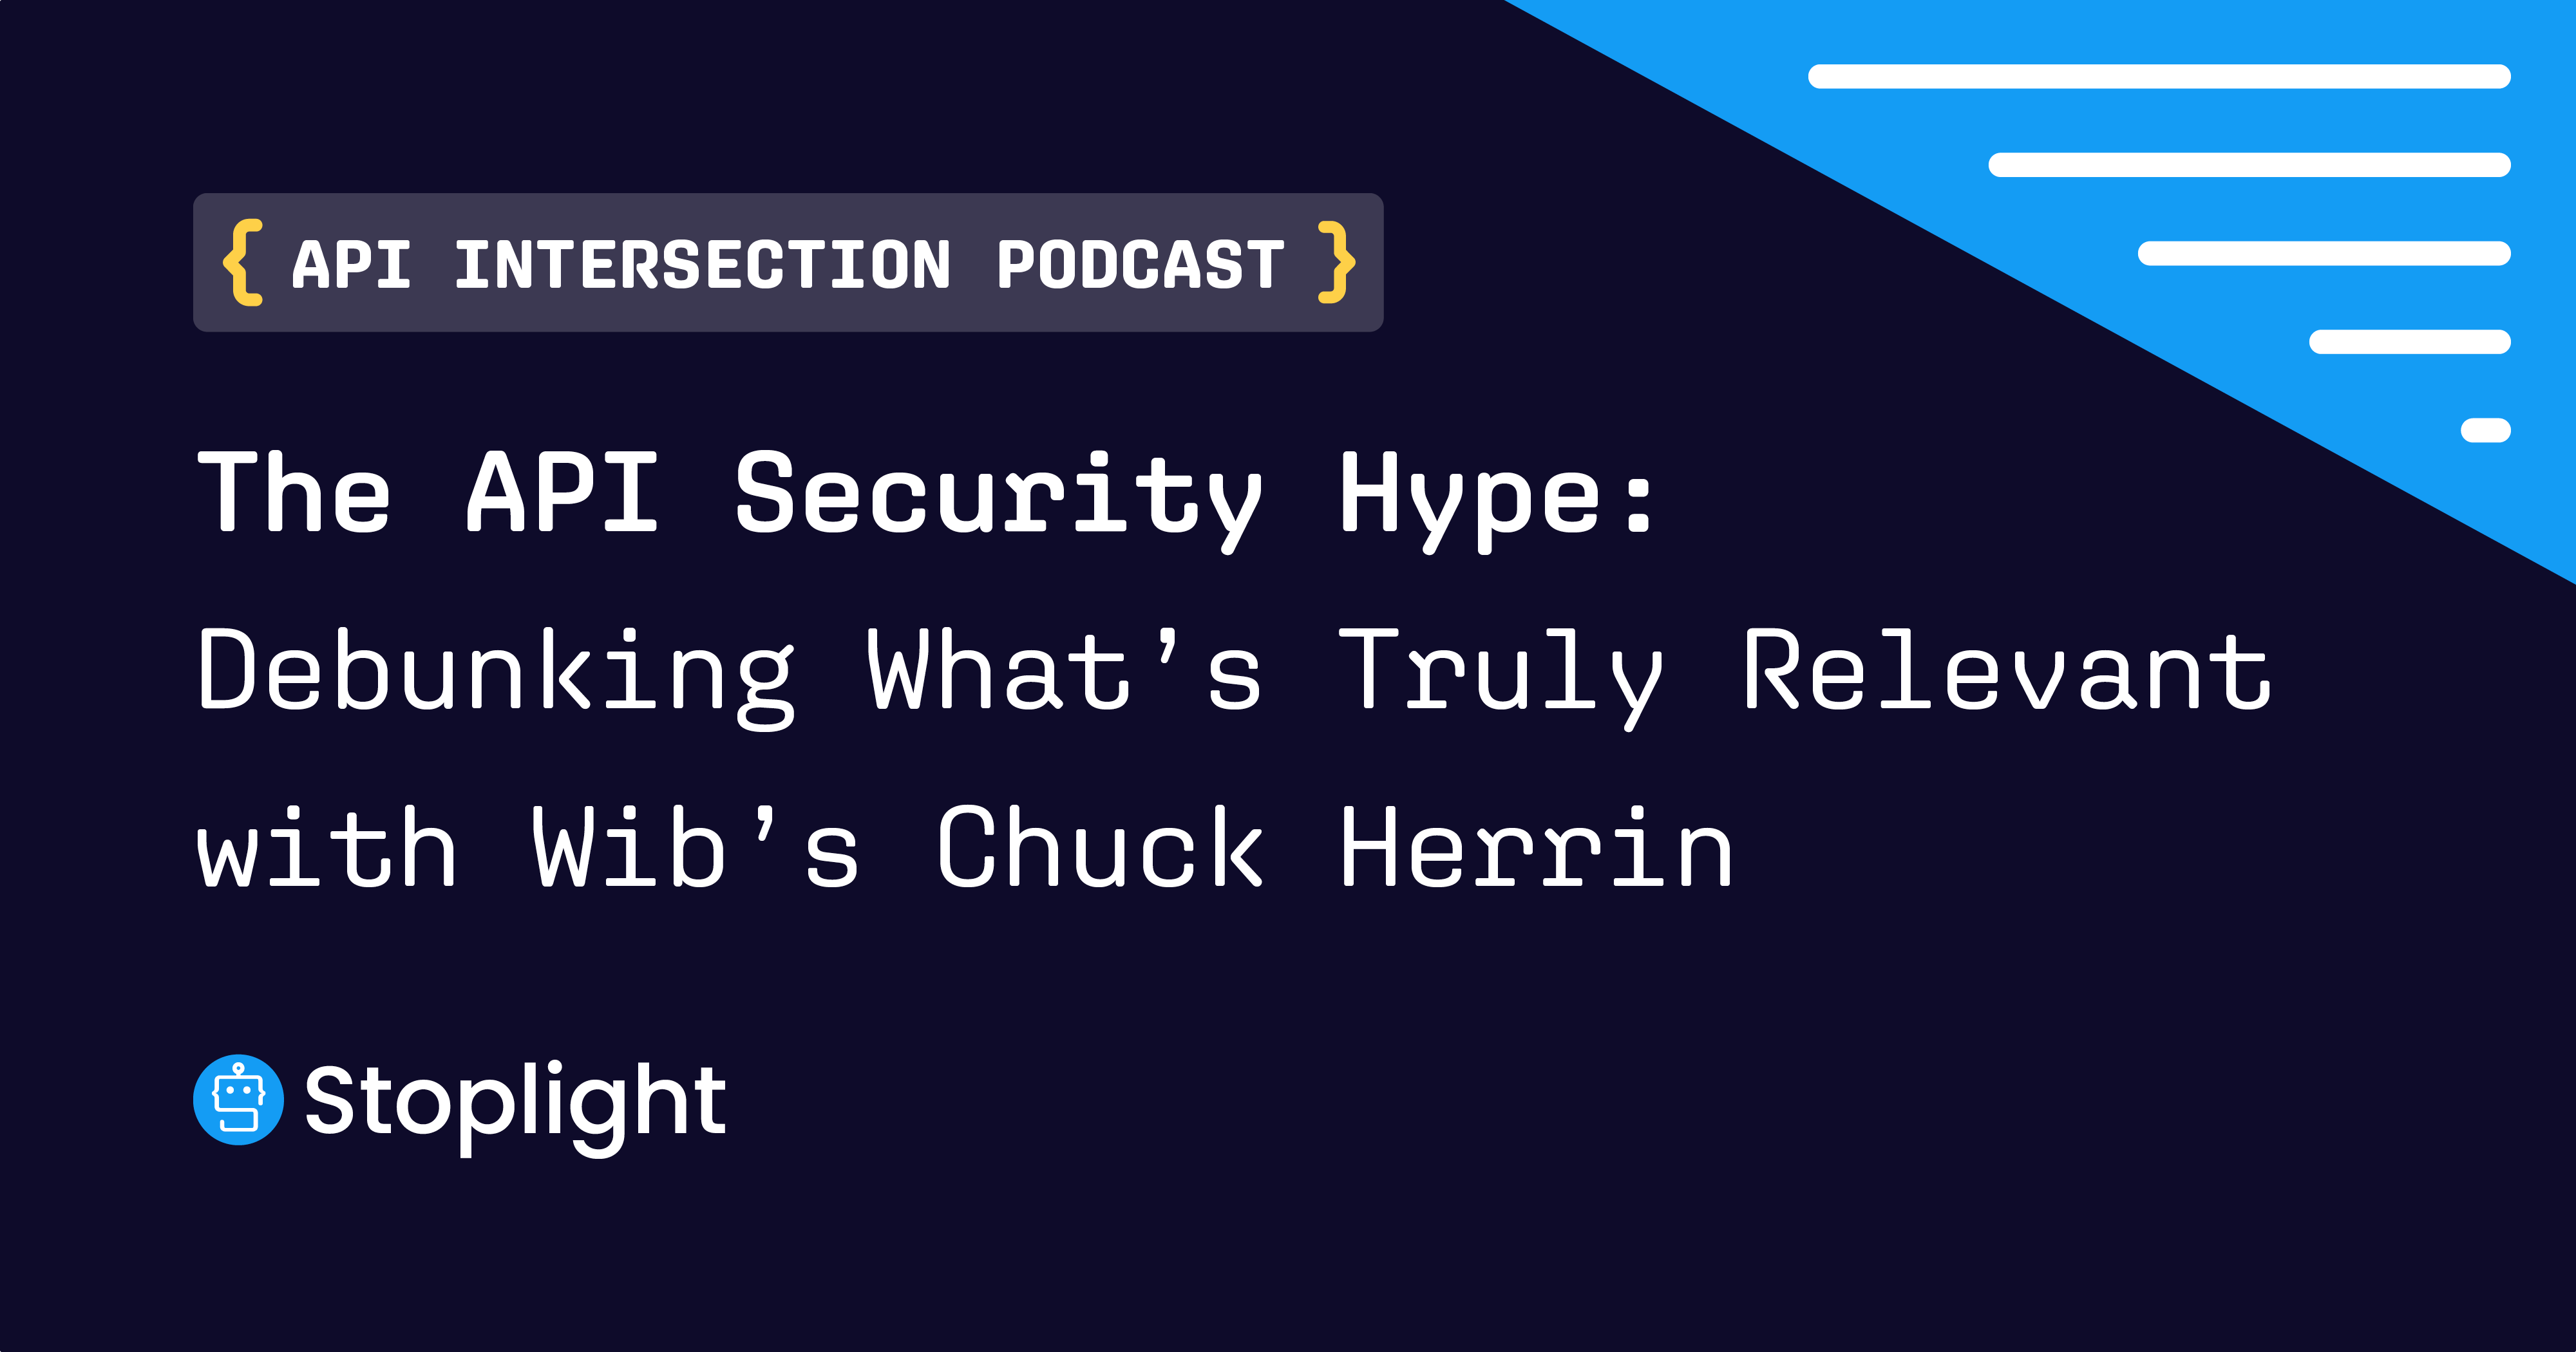 The API Security Hype: Debunking What’s Truly Relevant with Wib’s Chuck Herrin